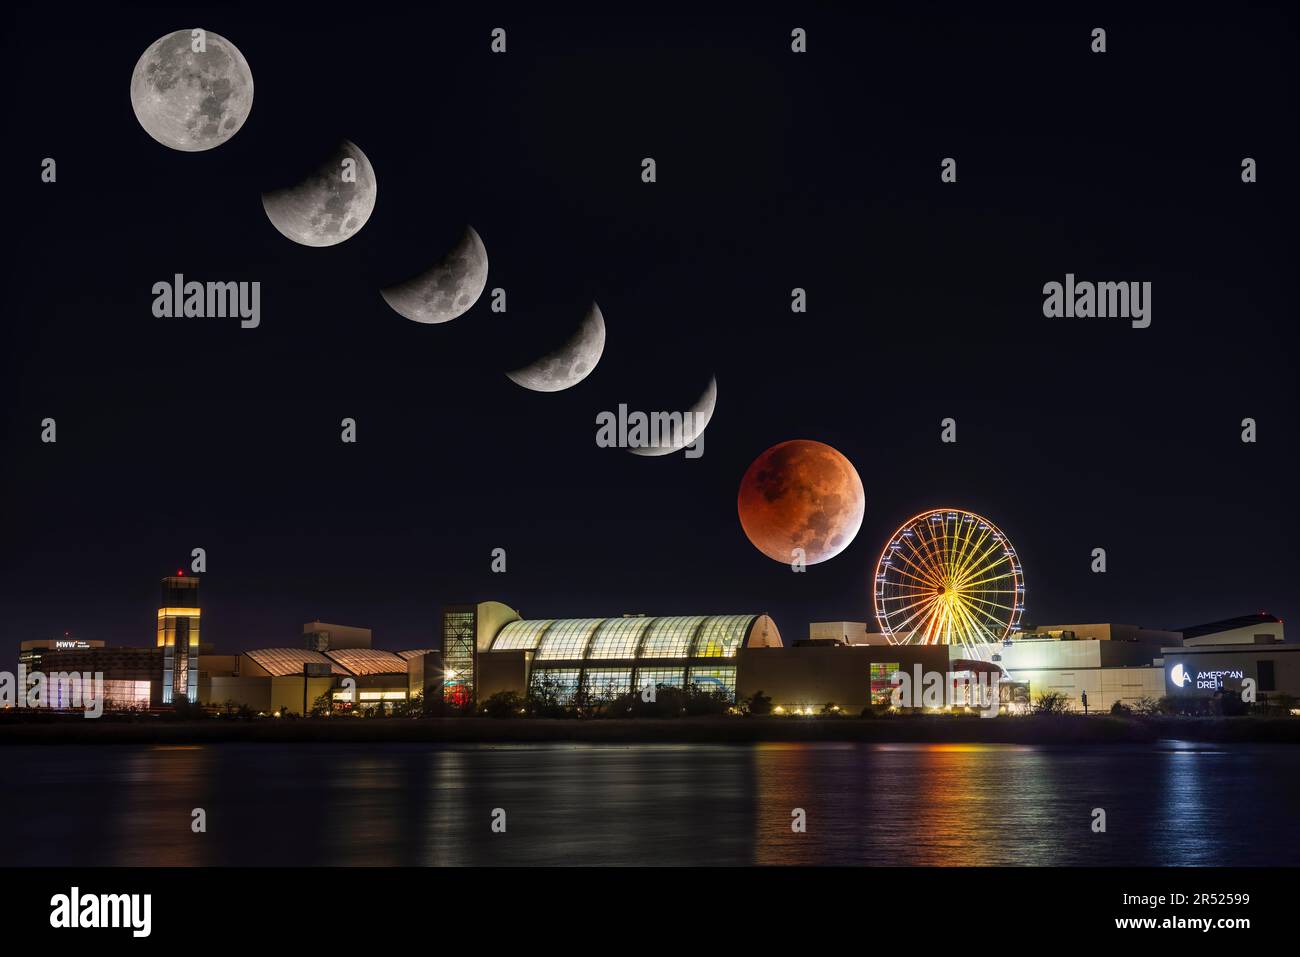 Lunar Eclipse Sequence - The progression of the Beaver full blood moon lunar eclipse.  Also seen is the illuminated Dream Wheel ferris wheel at Americ Stock Photo